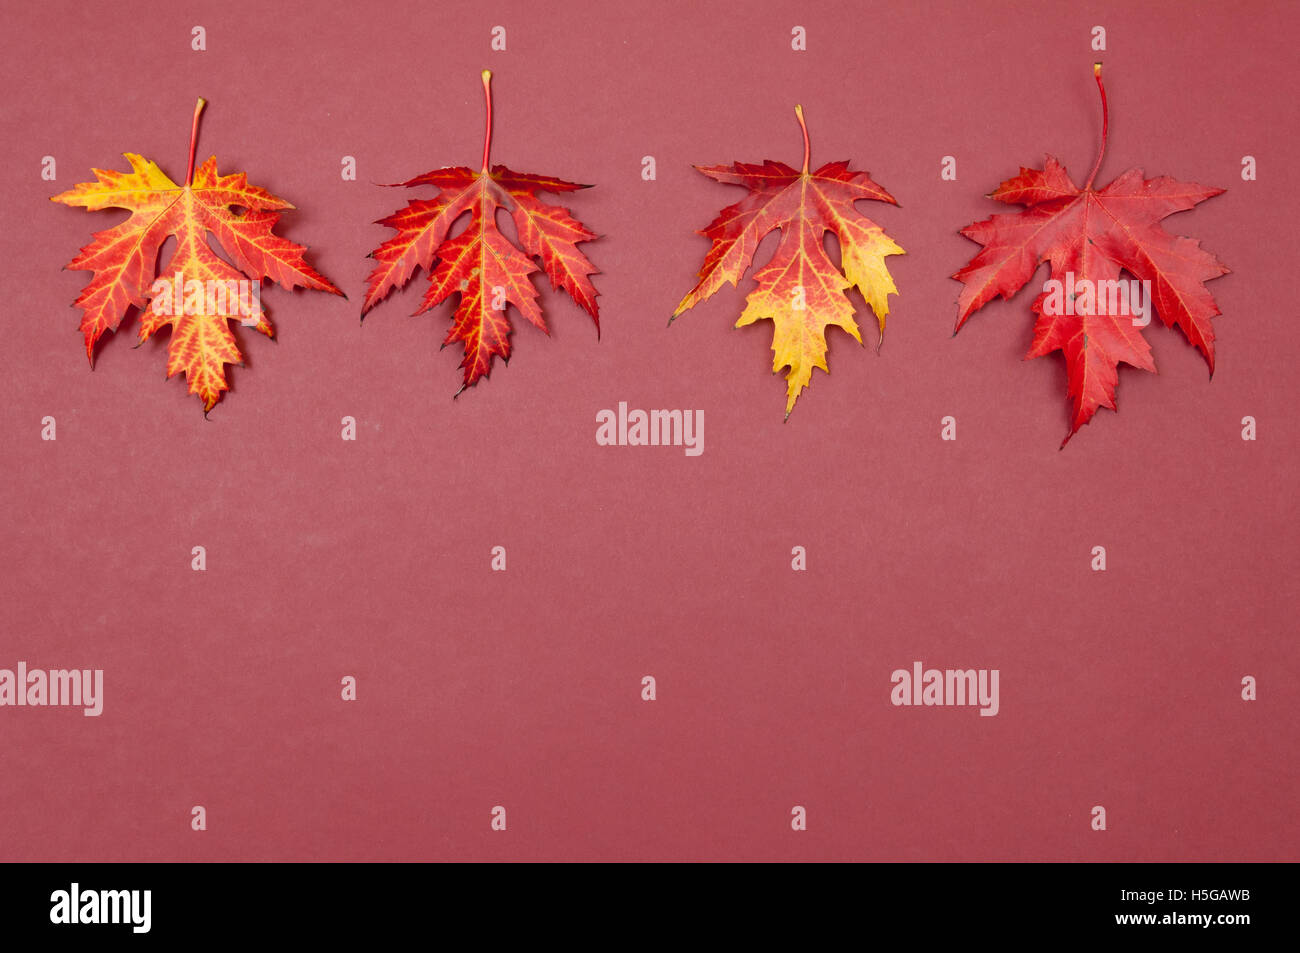 Pattern of colorful fallen autumn maple leaves on claret background Stock Photo